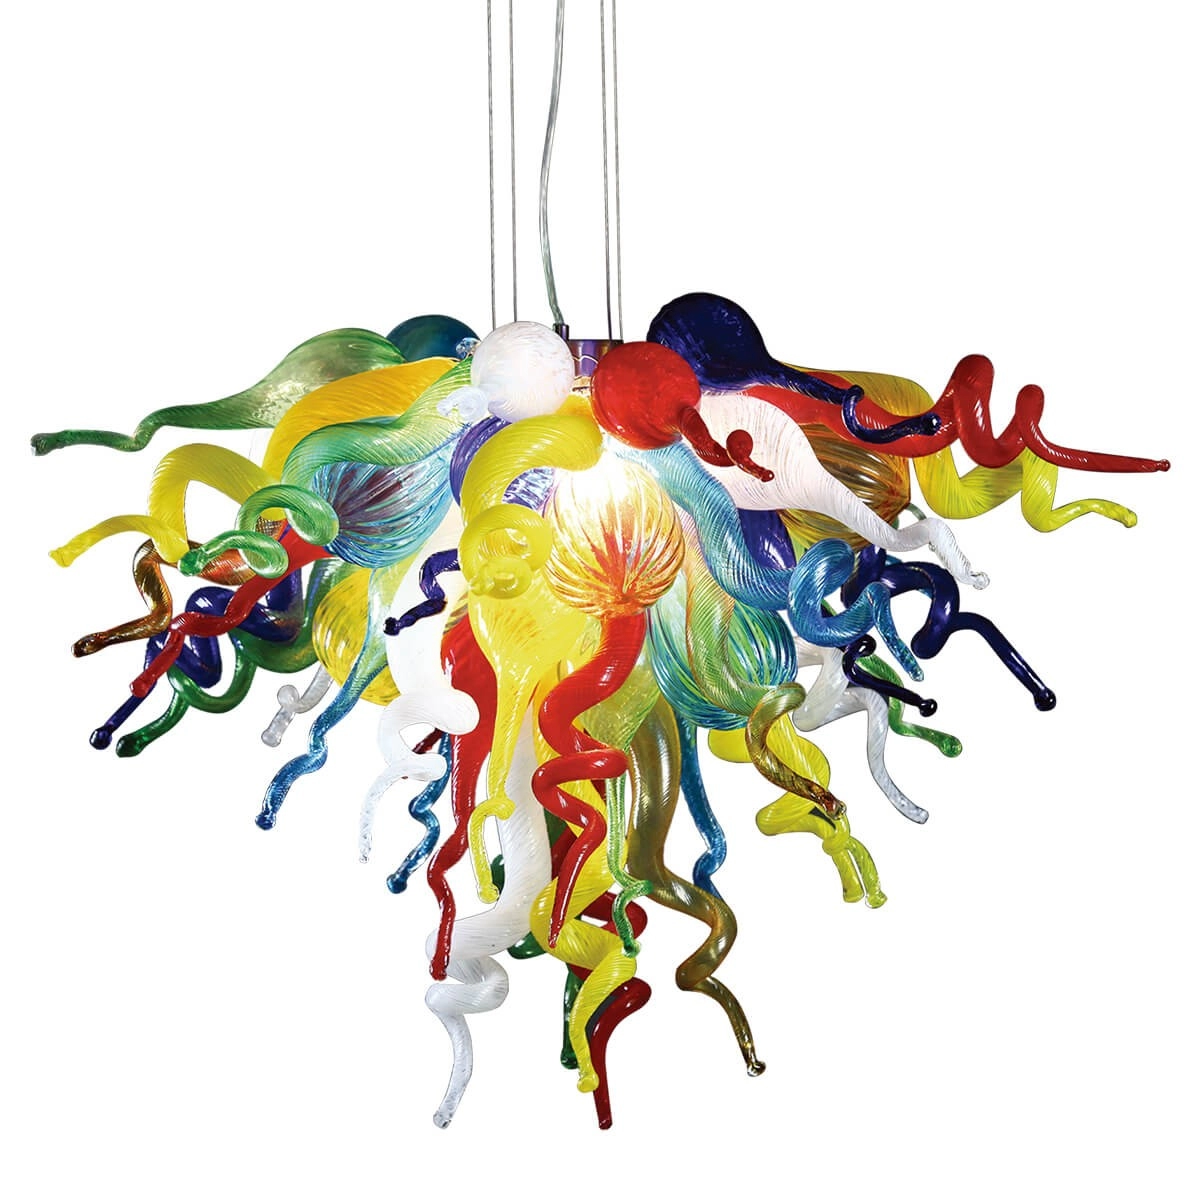 Rainbow color chihuly glass chandelier